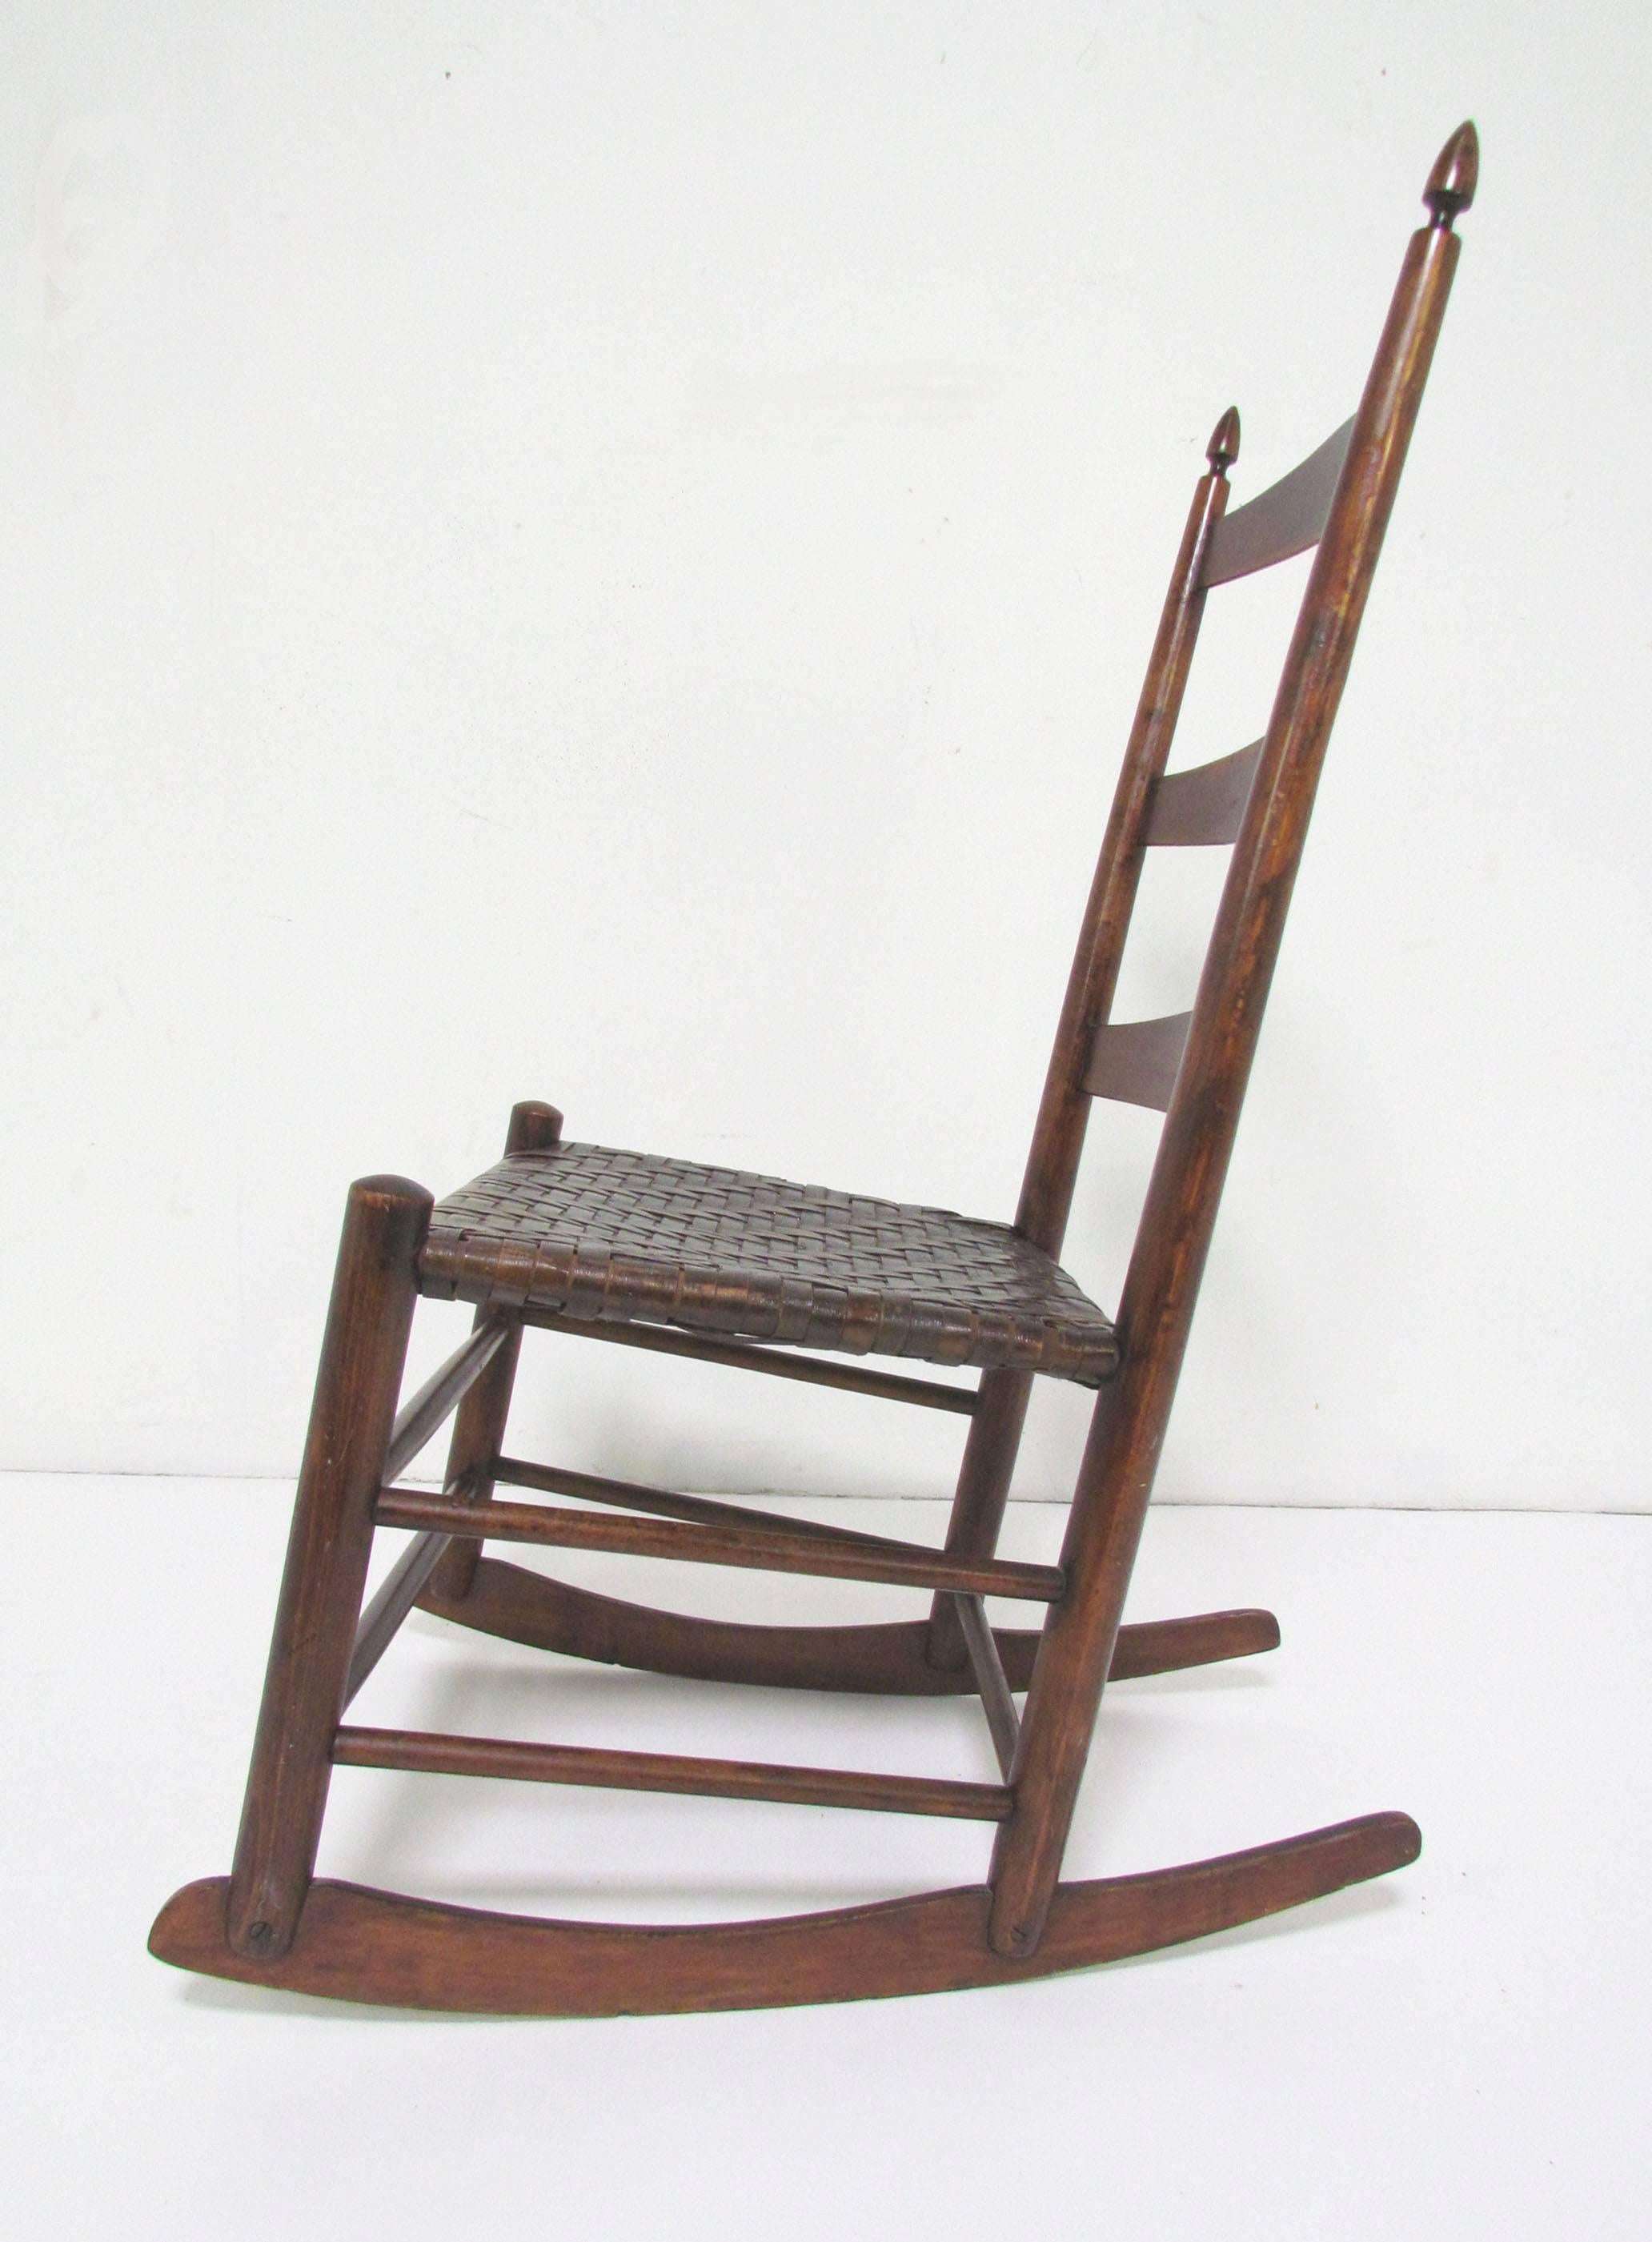 Antique Shaker rocker, circa 1890s. Impressed mark, Model No. 3, on back slat. In stained maple with original woven splint seat.